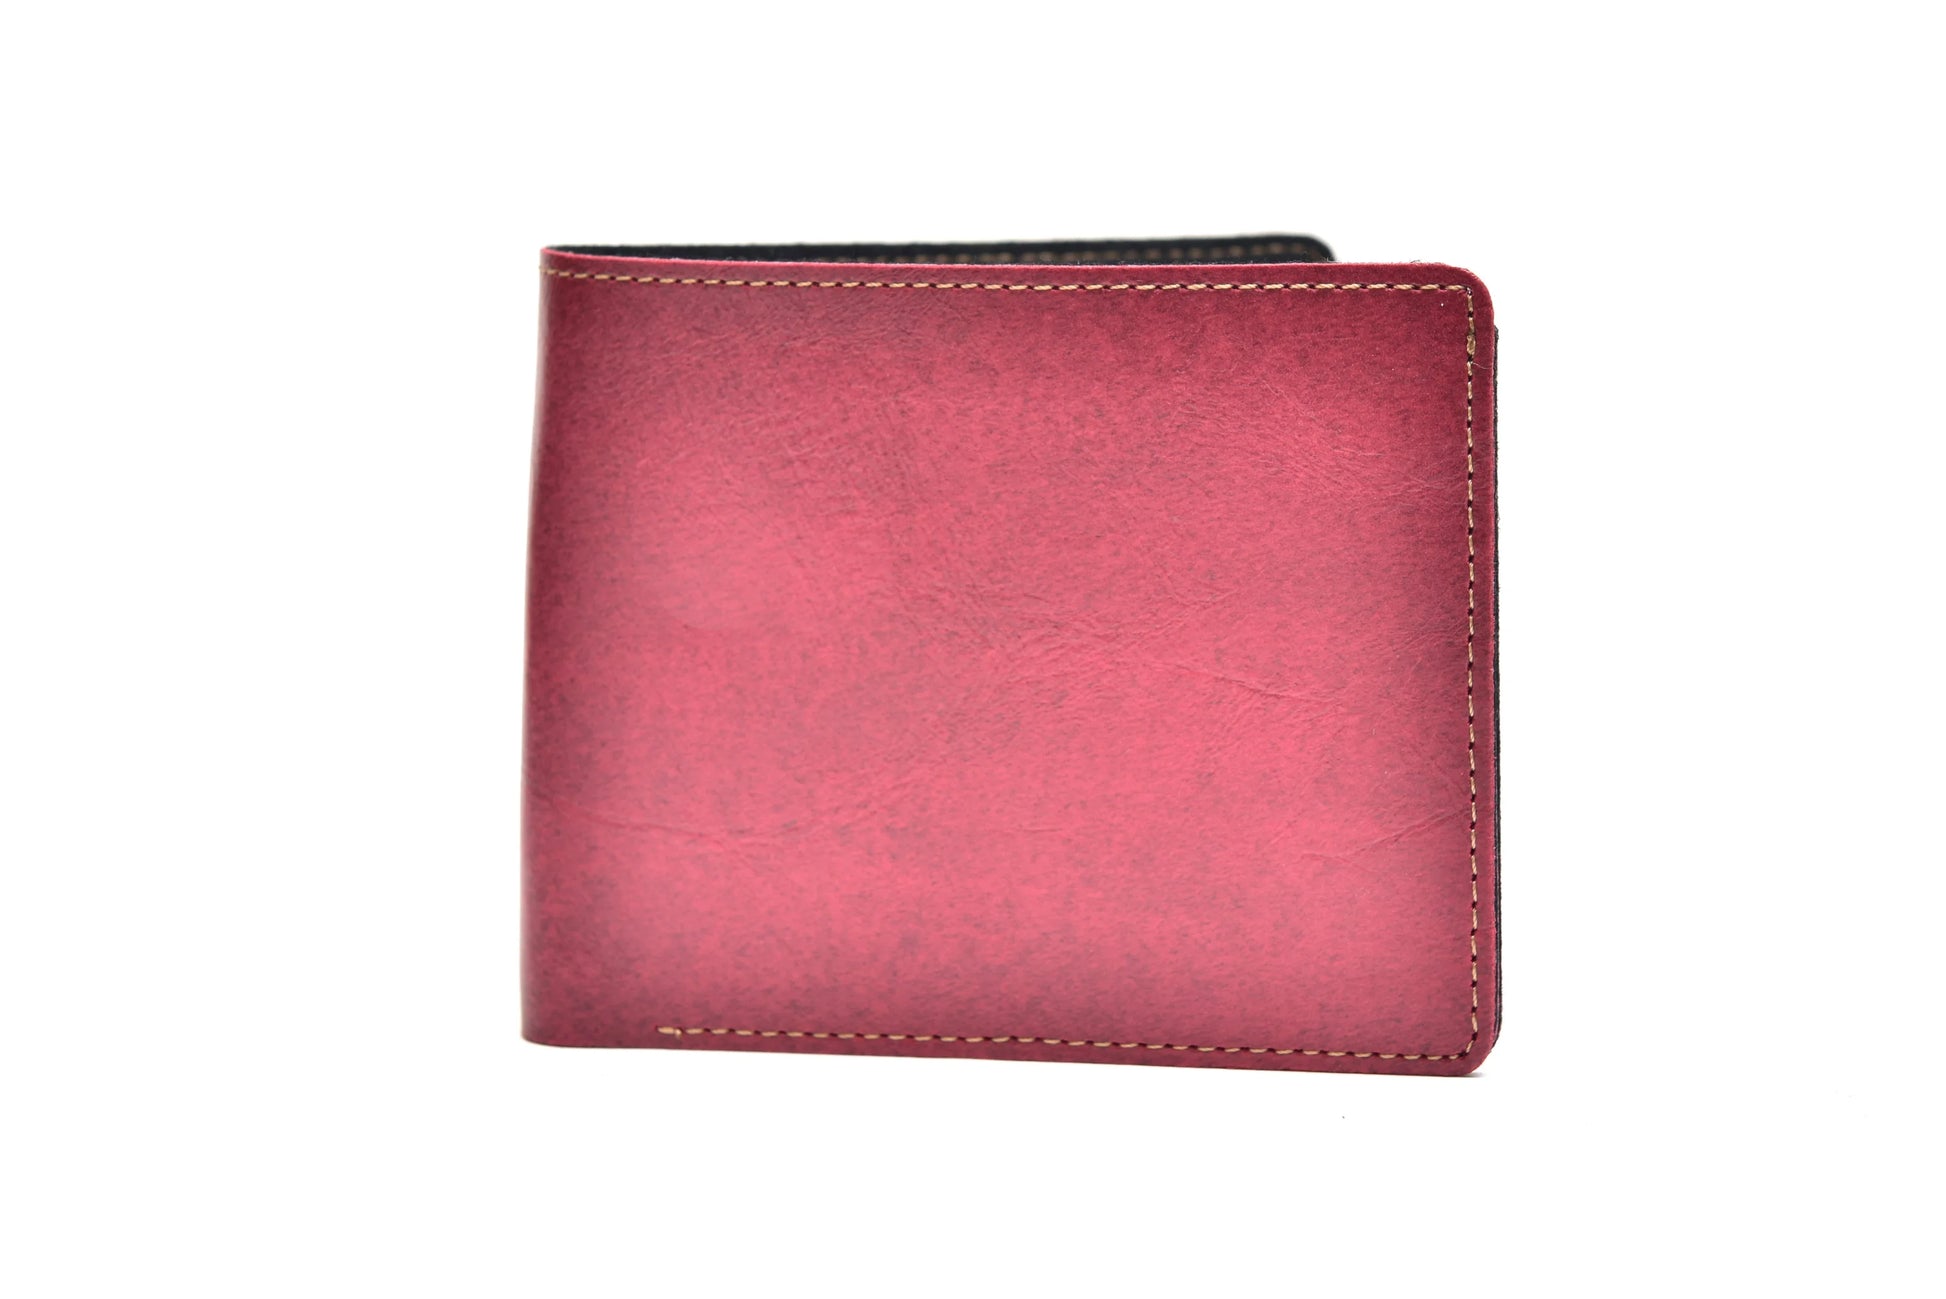 Stylish maroon wallet made with the best quality synthetic leather is the perfect touch to any office/formal outfit. The option to customize it with your name and lucky charm makes it that much more personal and unique. This also makes for a best business gift! Always be trending and in style with our personalized wallets.